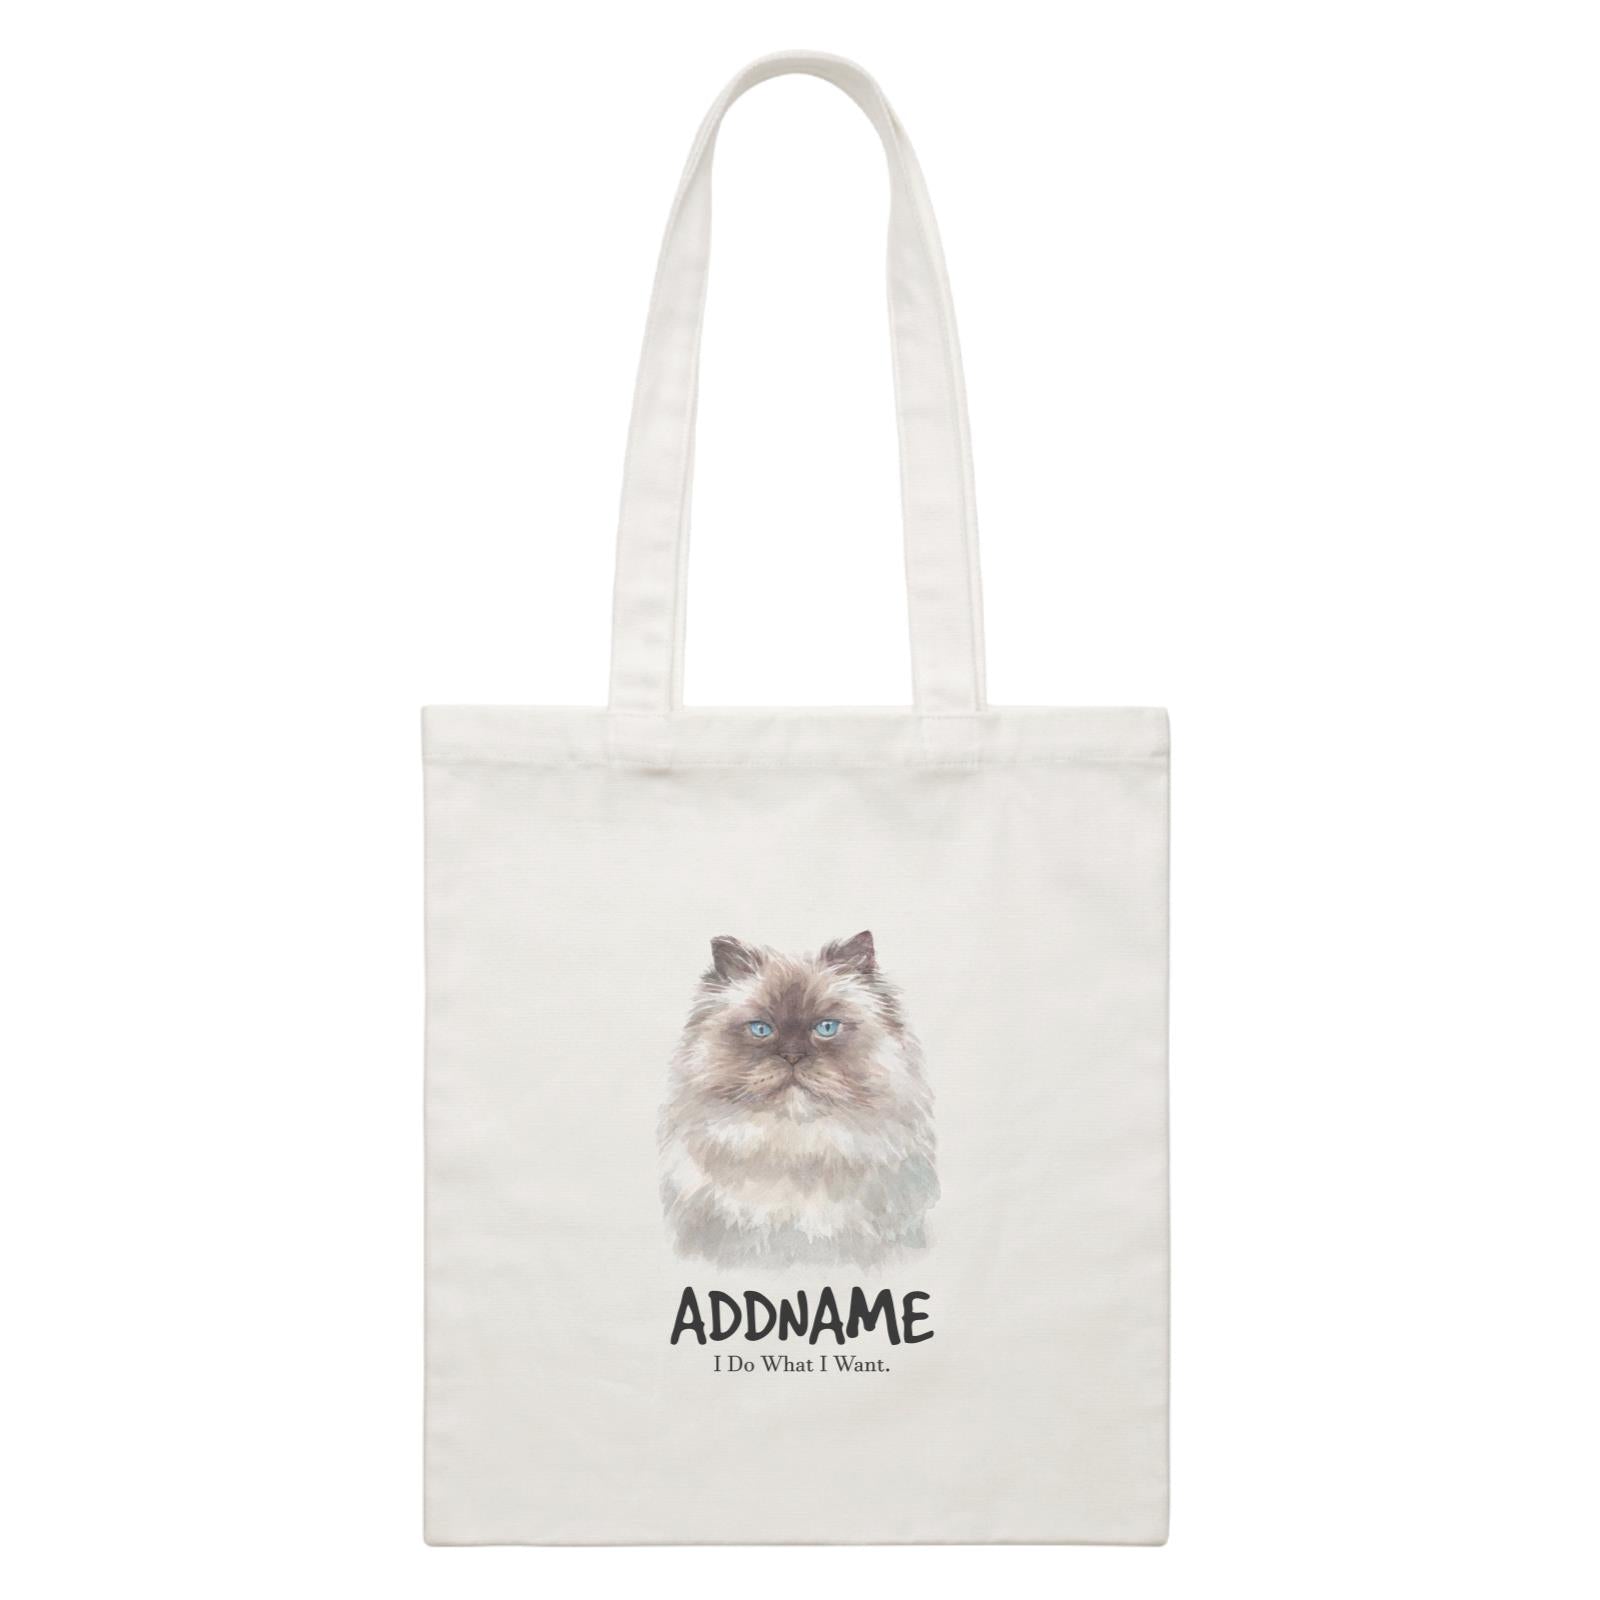 Watercolor Cat Himalayan Dark Face I Do What I Want Addname White Canvas Bag